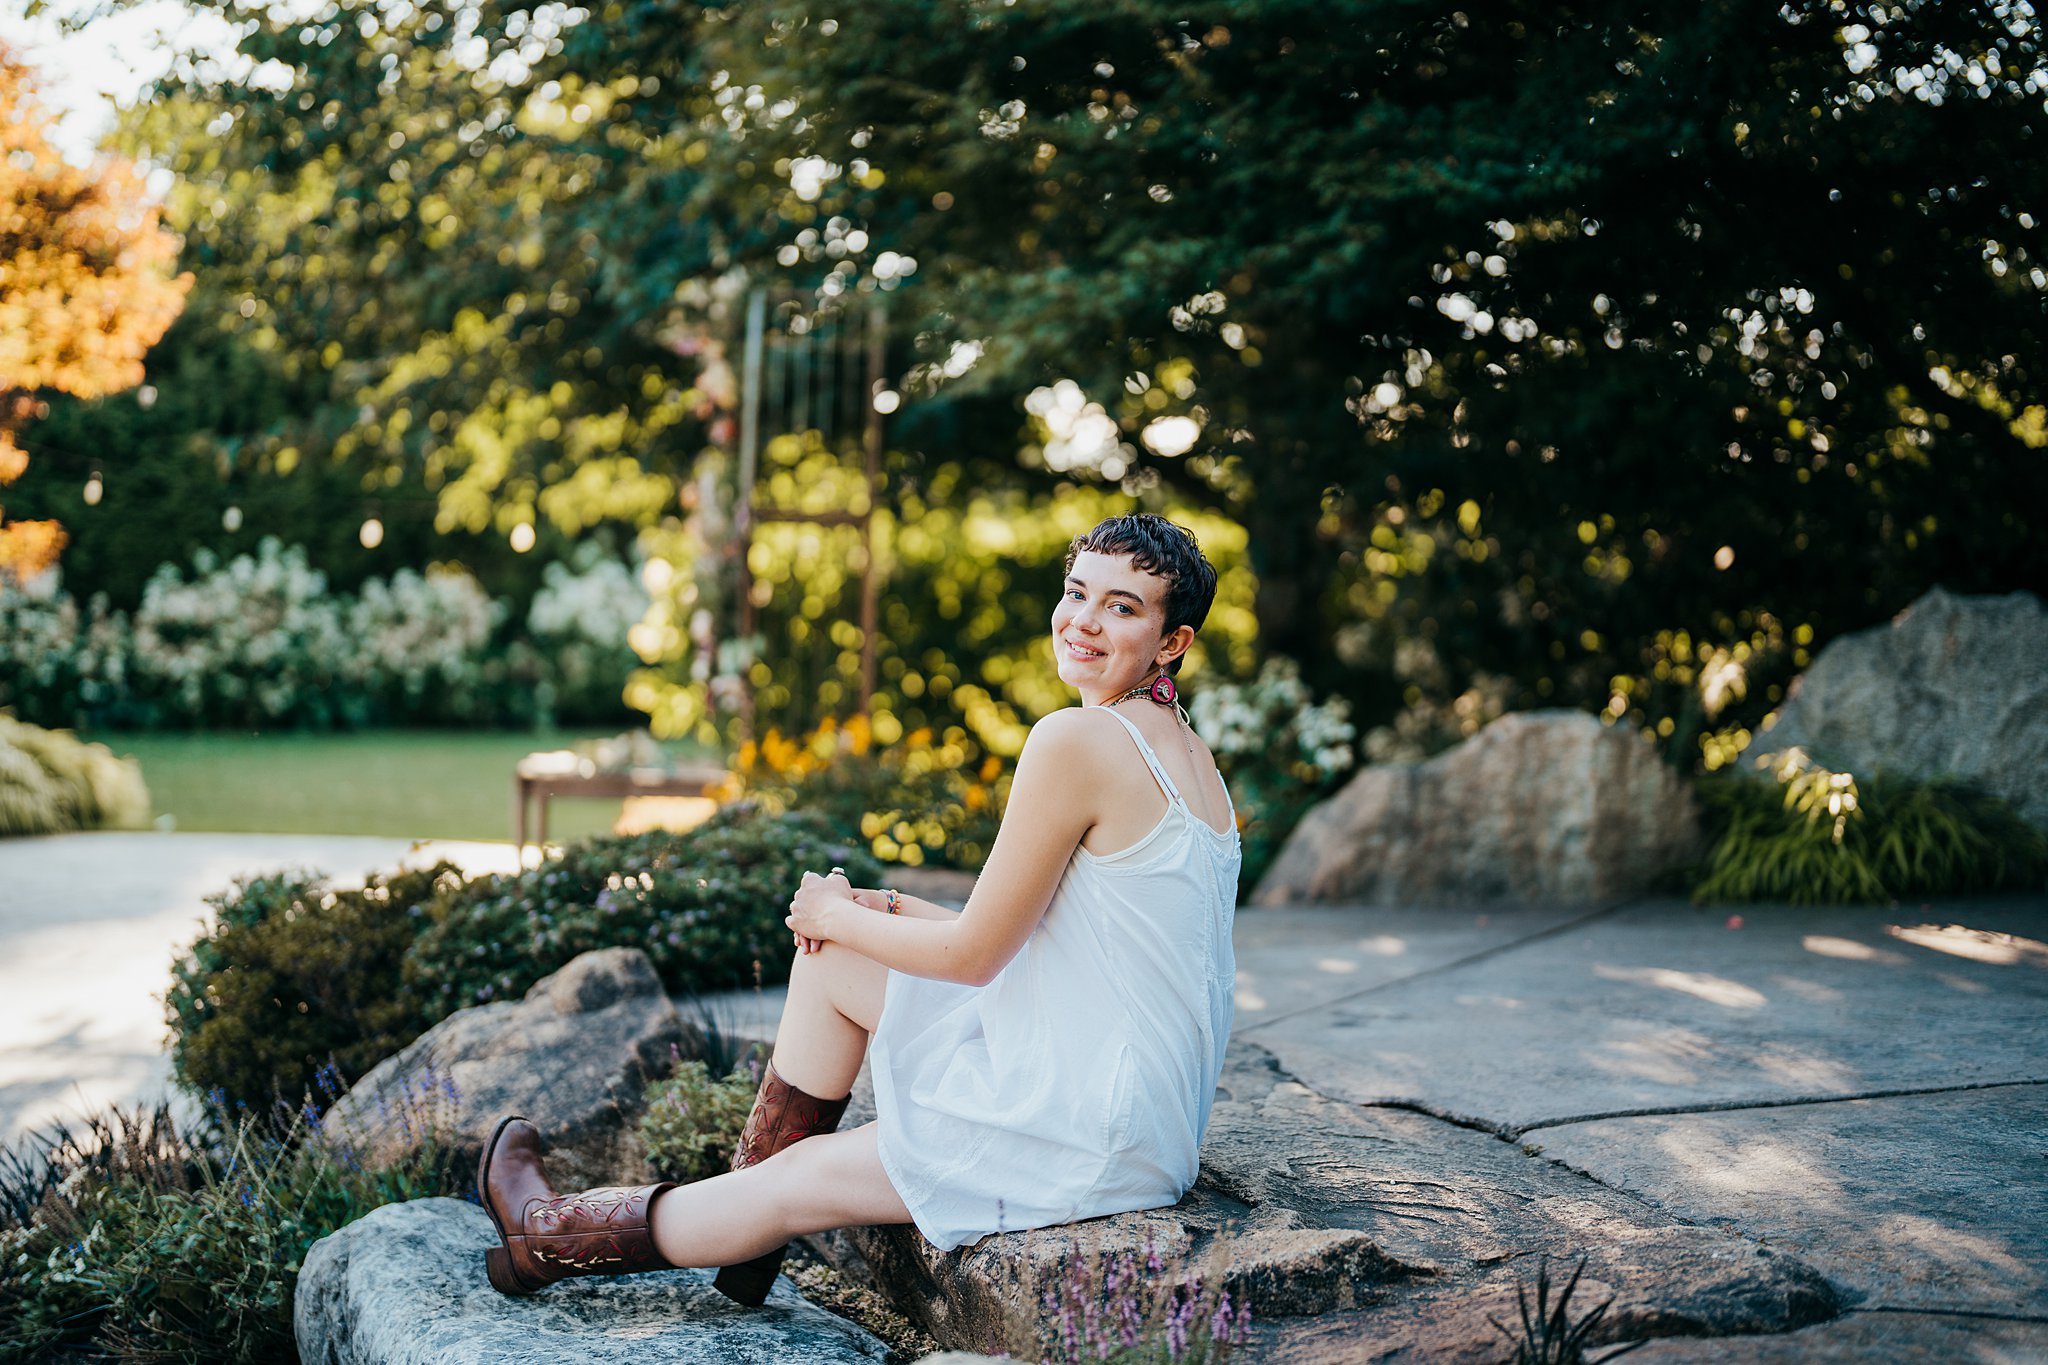 A woman in a white dress and brown booth sits on some rocks in a garden Seattle Photoshoot Locations